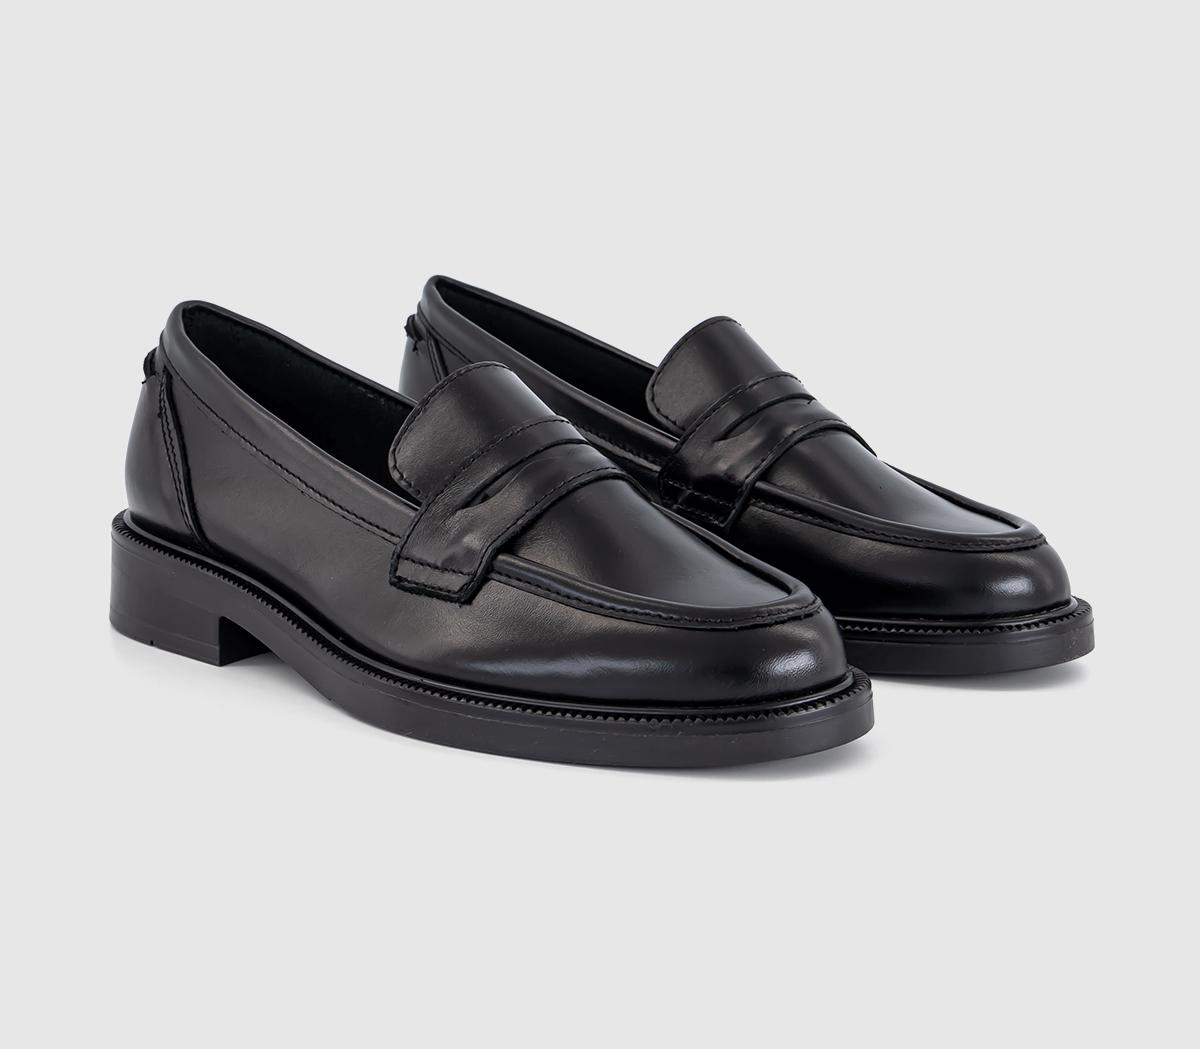 OFFICE Womens Forgive Penny Leather Loafers Black, 8